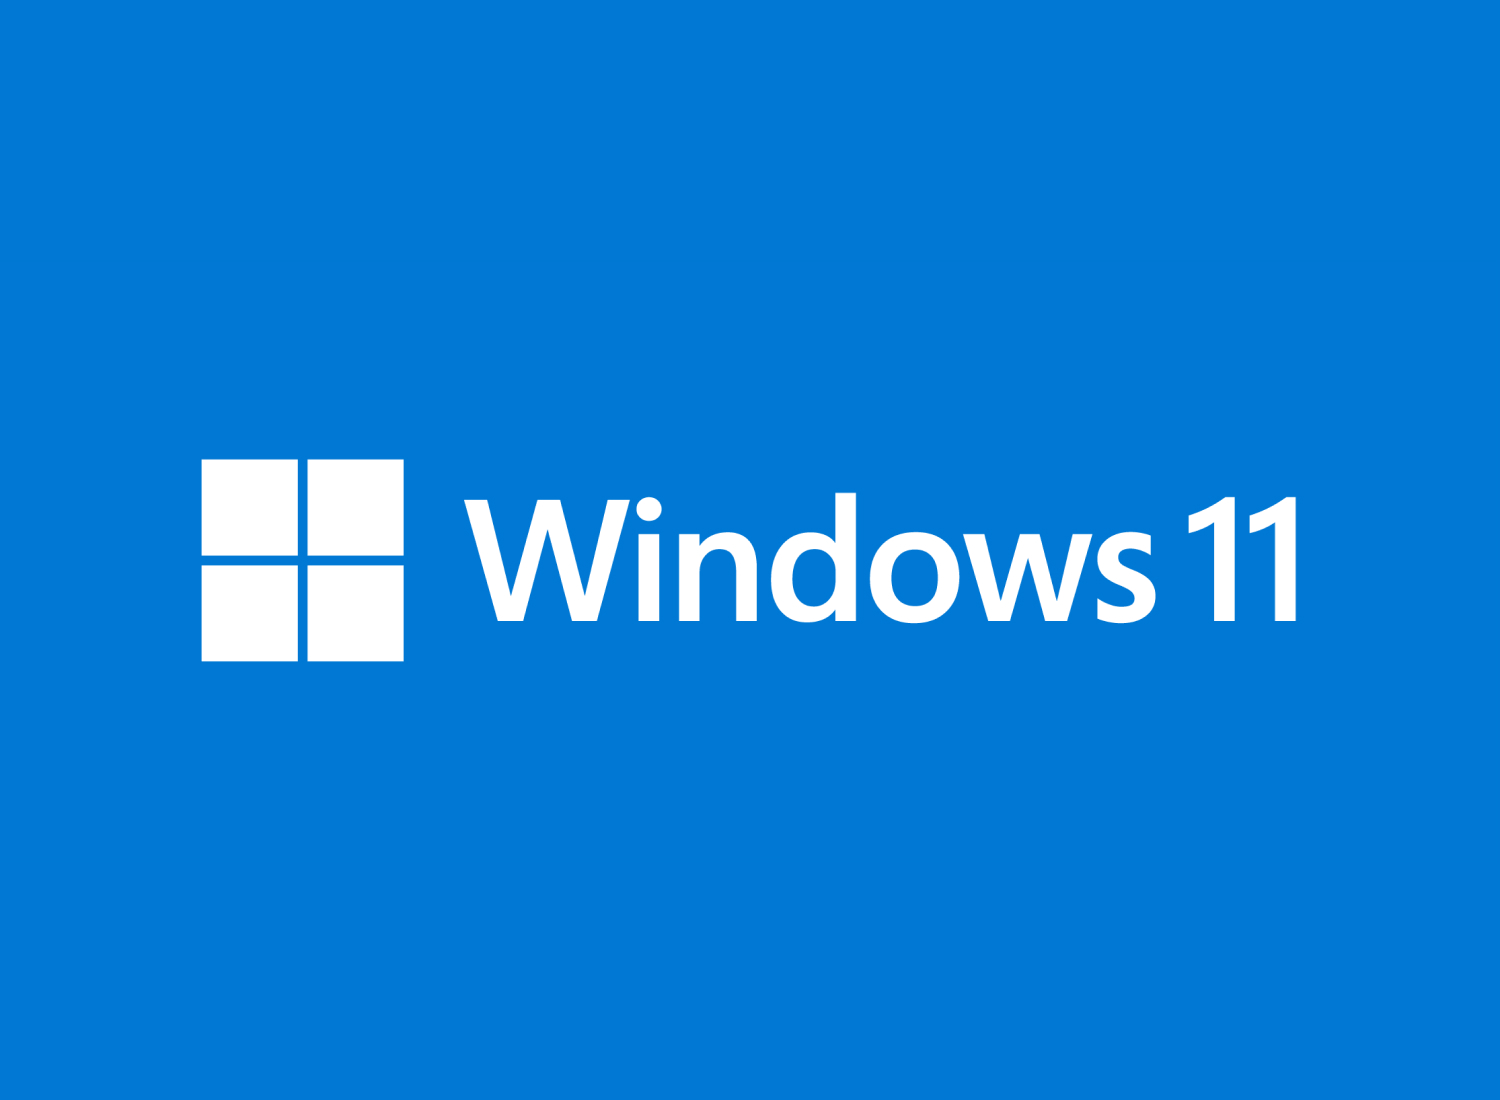 Announcing Windows 11 Insider Preview Build 22621.598 and 22622.598